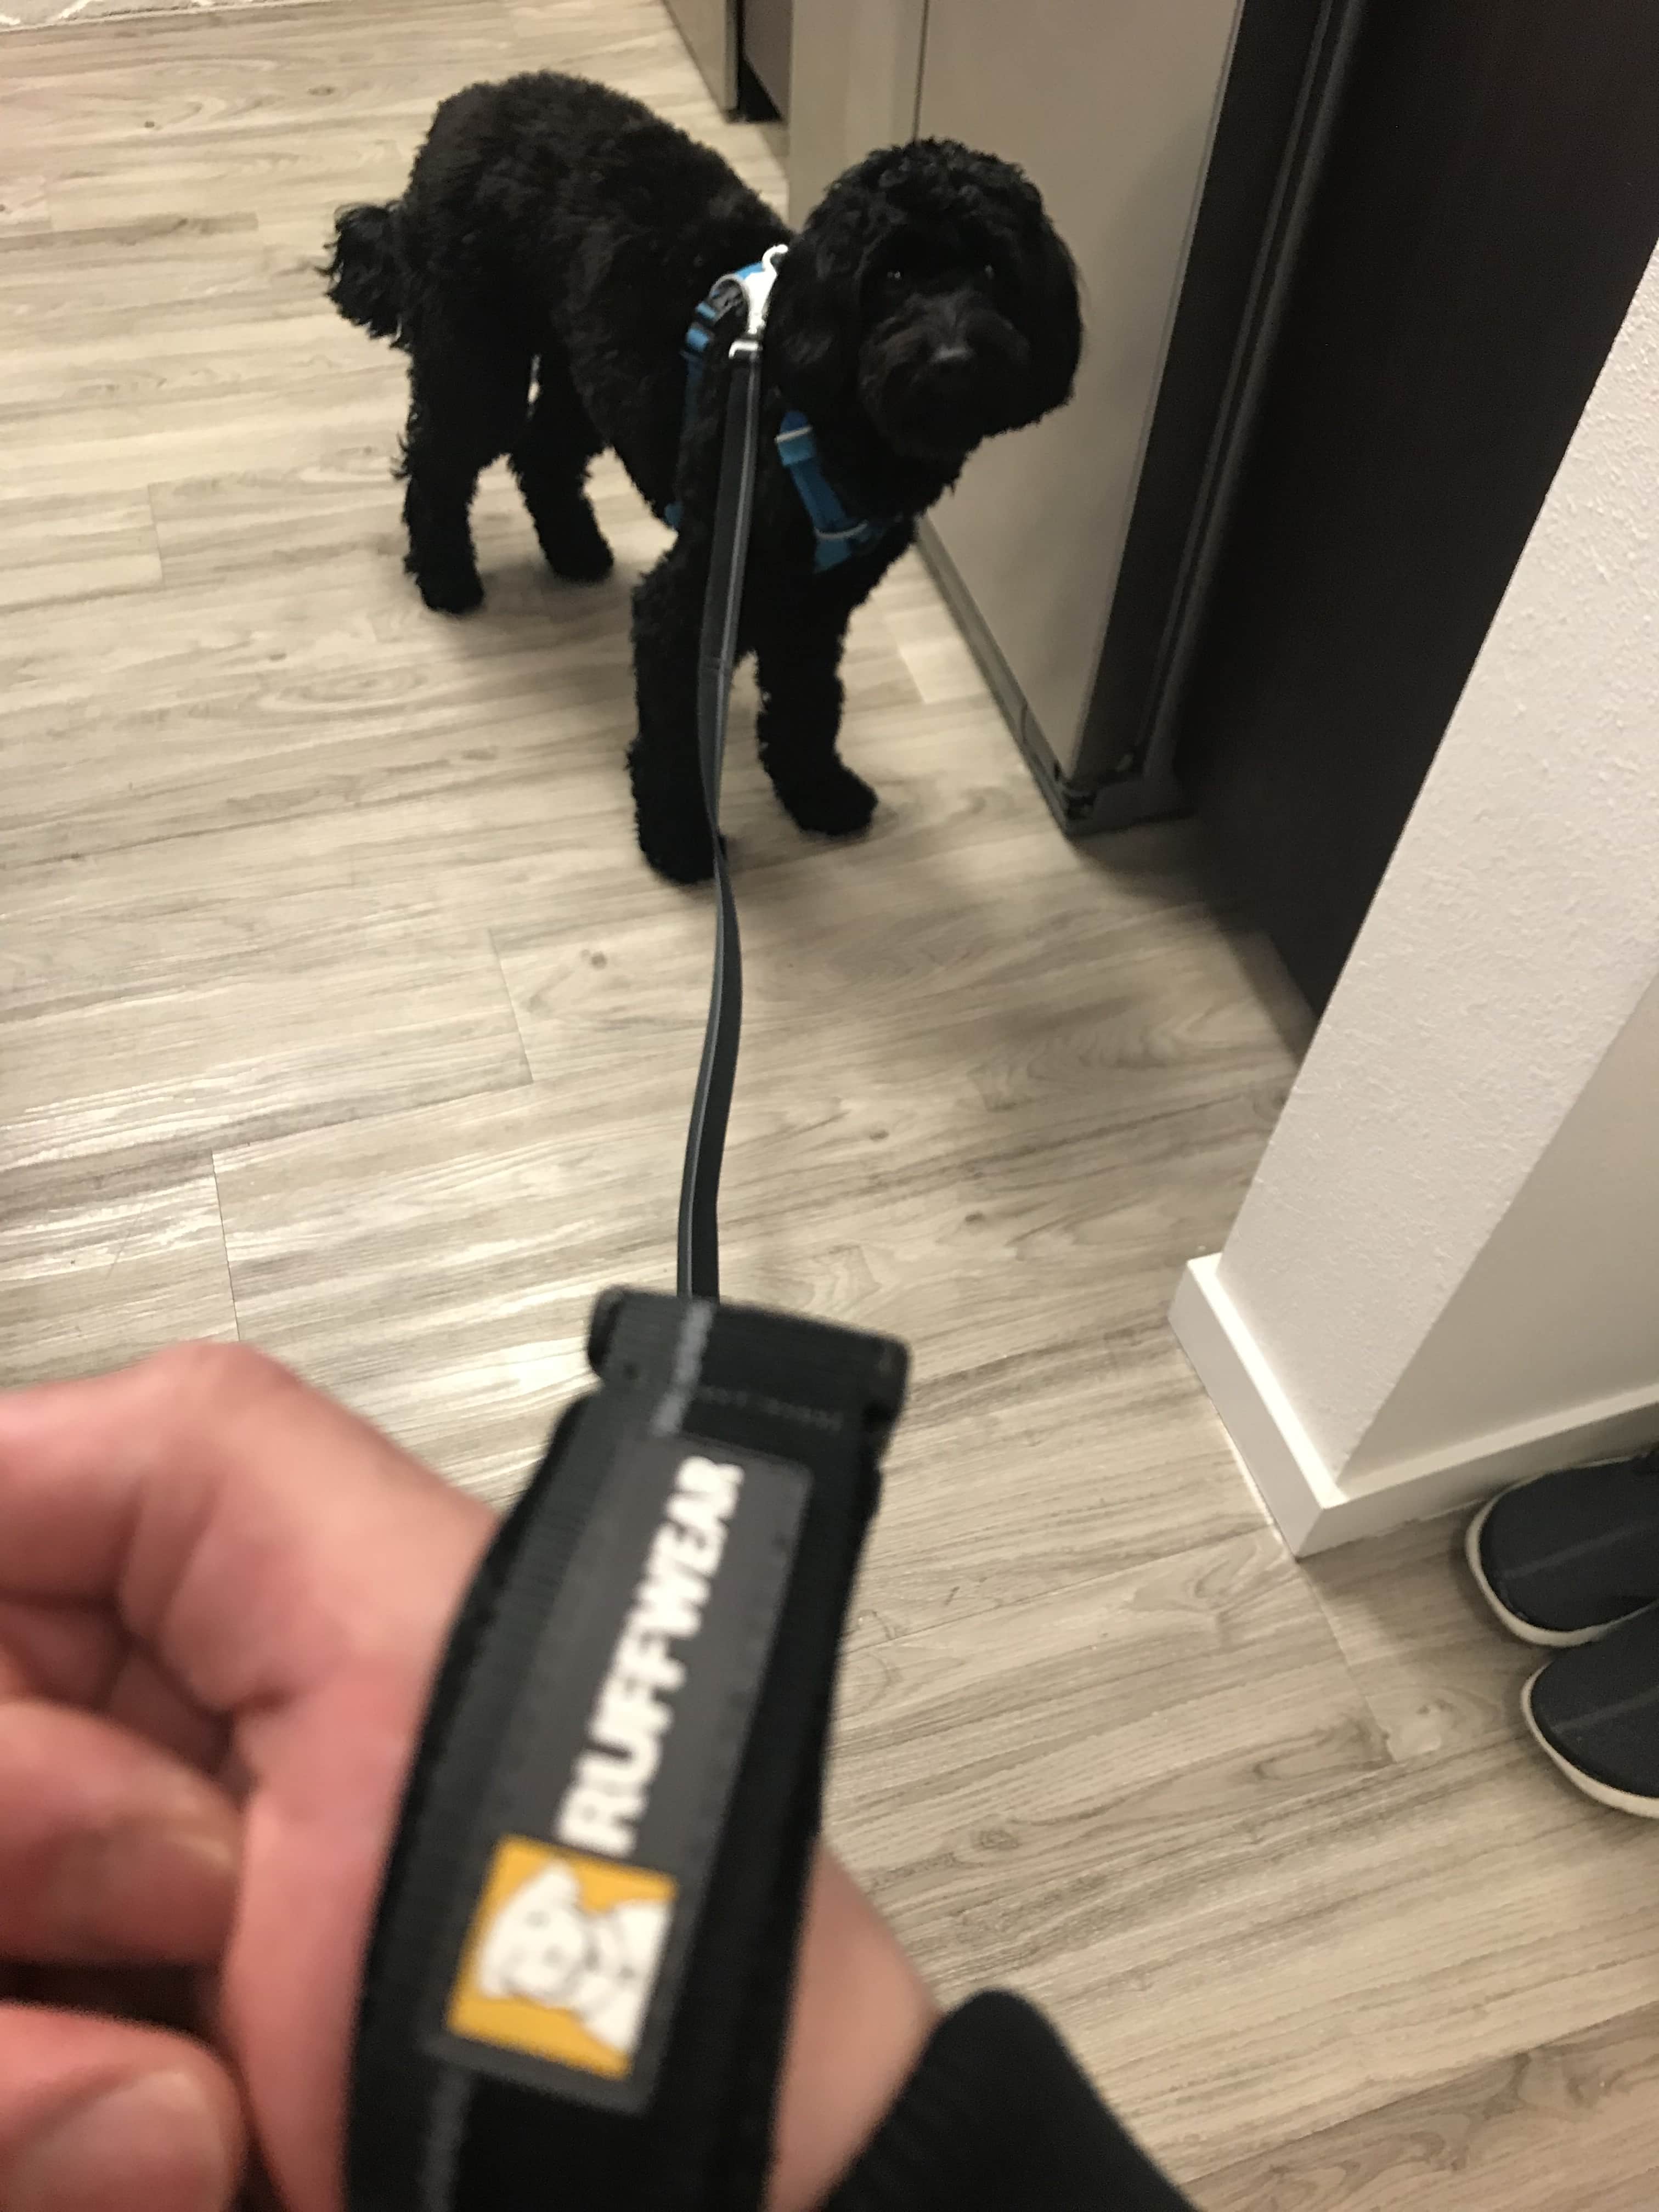 Golden doodle on ruffwear flatout leash about to go for walk